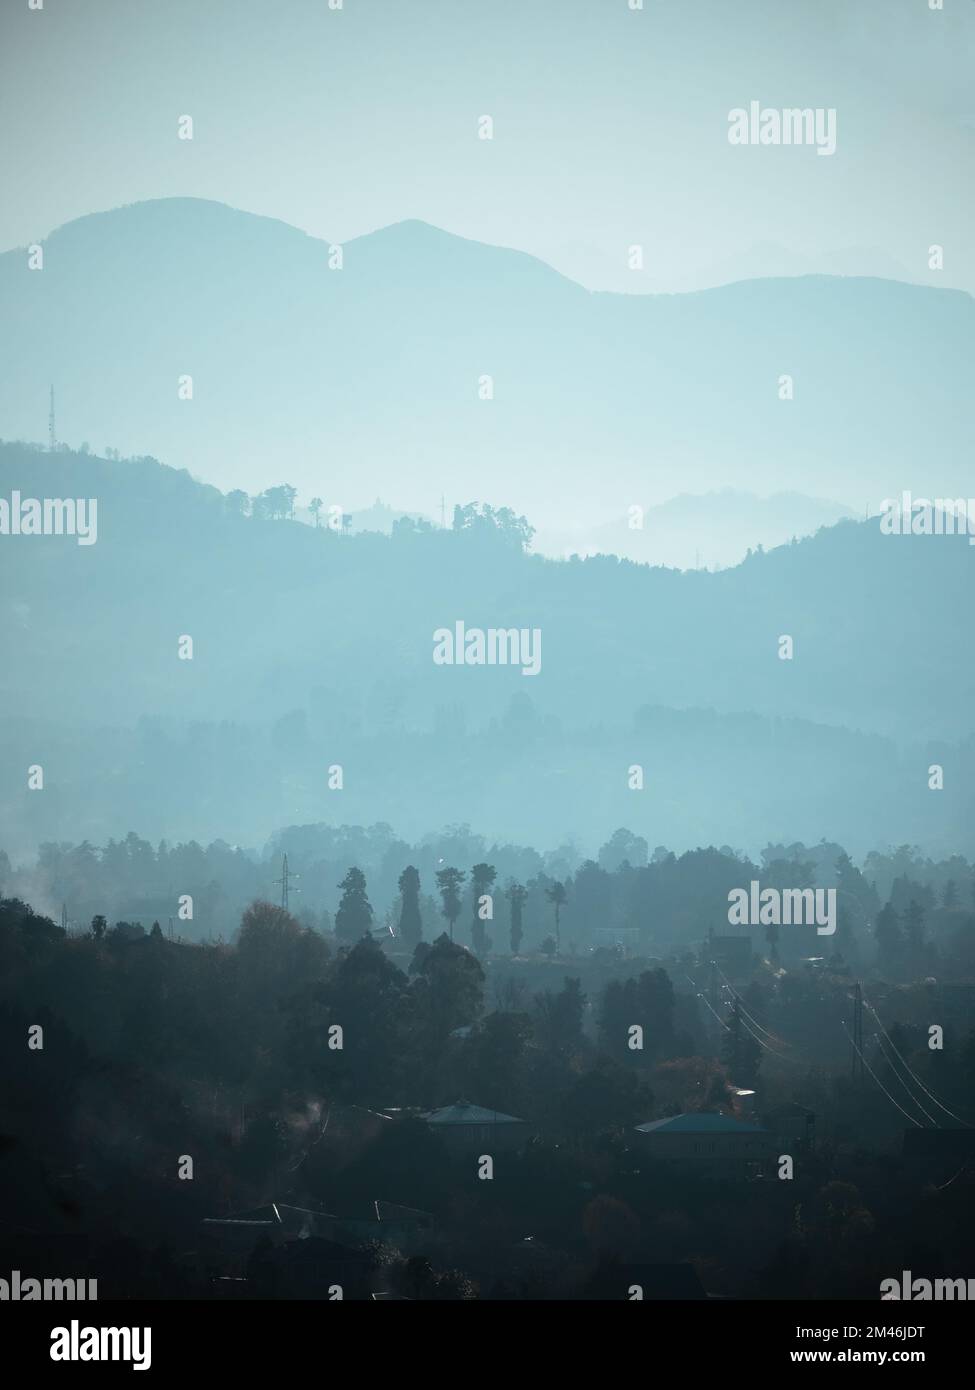 Layers of silhouettes of mountain ranges in fog, mist or smoke. Vertical banner nature landscape in blue color. Stock Photo